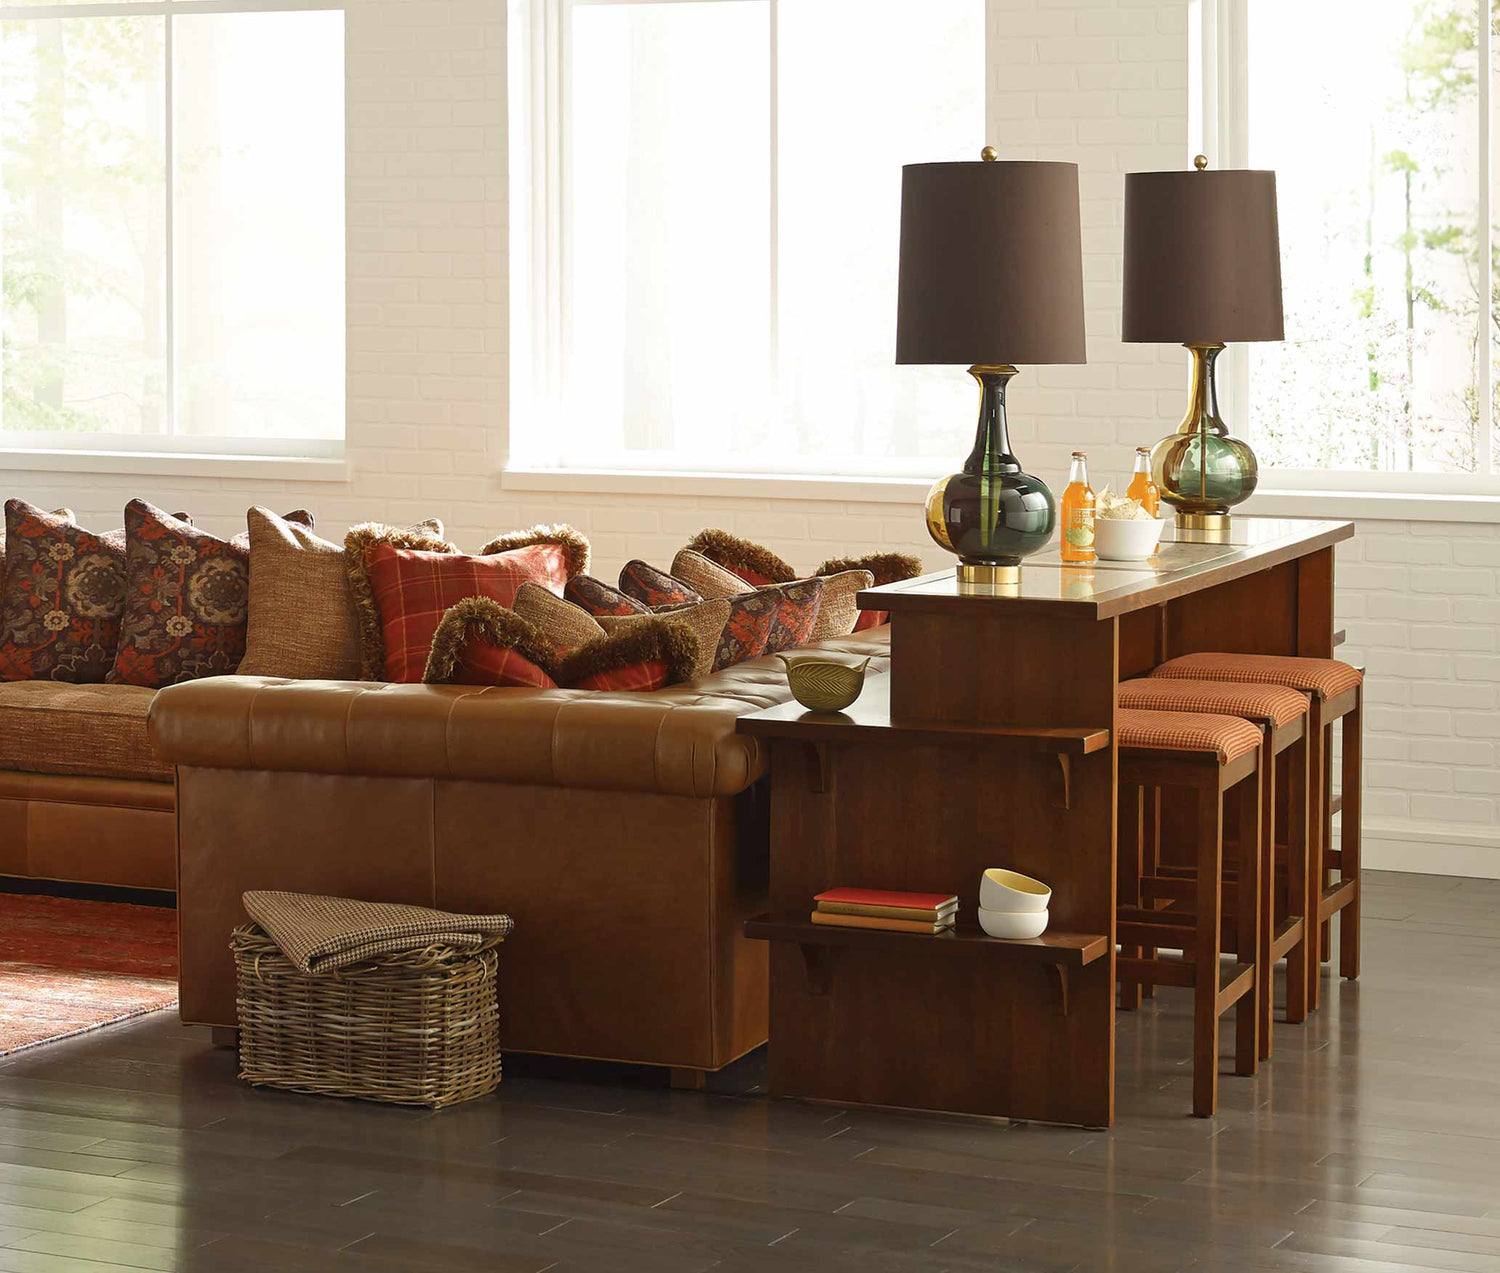 Lifestyle of a Gathering Island with matching stools against a brown leather sectional. The Gathering Island has two matching lamps on top of it as well as two drinks.